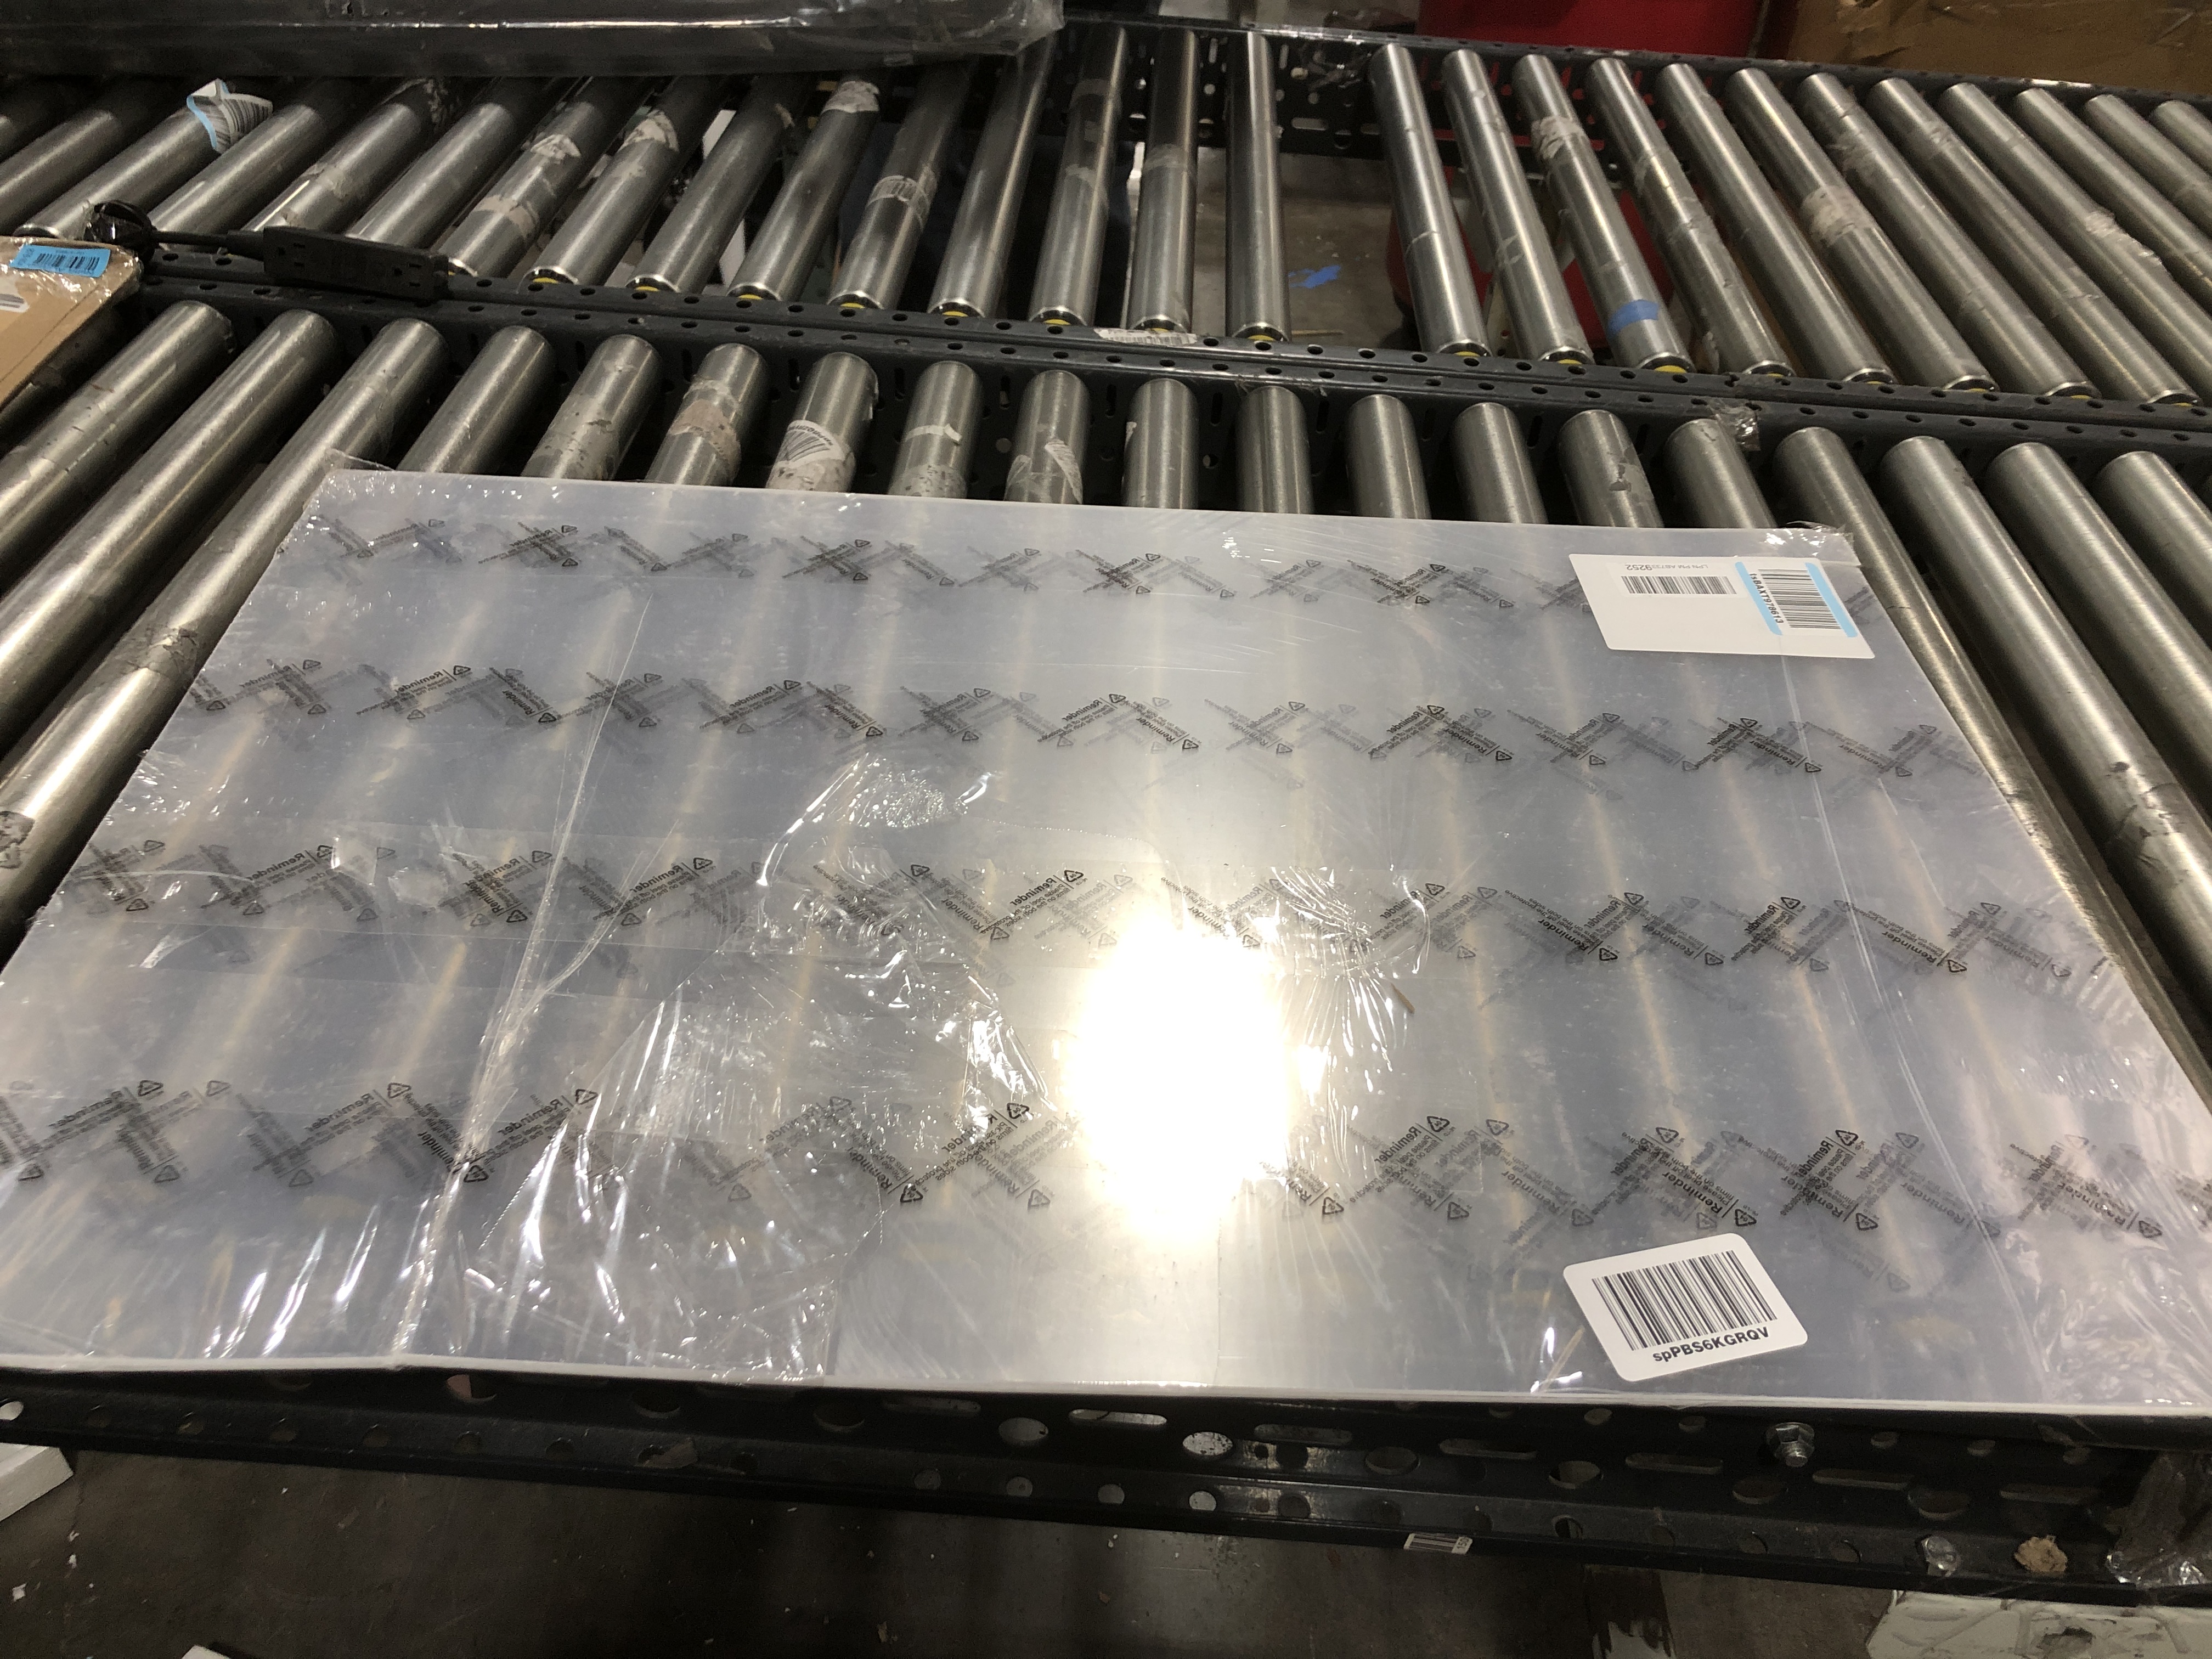 Photo 2 of 11x14 Plexiglass Quality PET Sheet Panels 5 Pack - 11x14" x .04" - Lightweight Shatterproof Alternative to Glass - for Picture Frame, DIY Projects, Signs, Sneeze Guards, Railing Guards, Pet Barriers 5 11x14